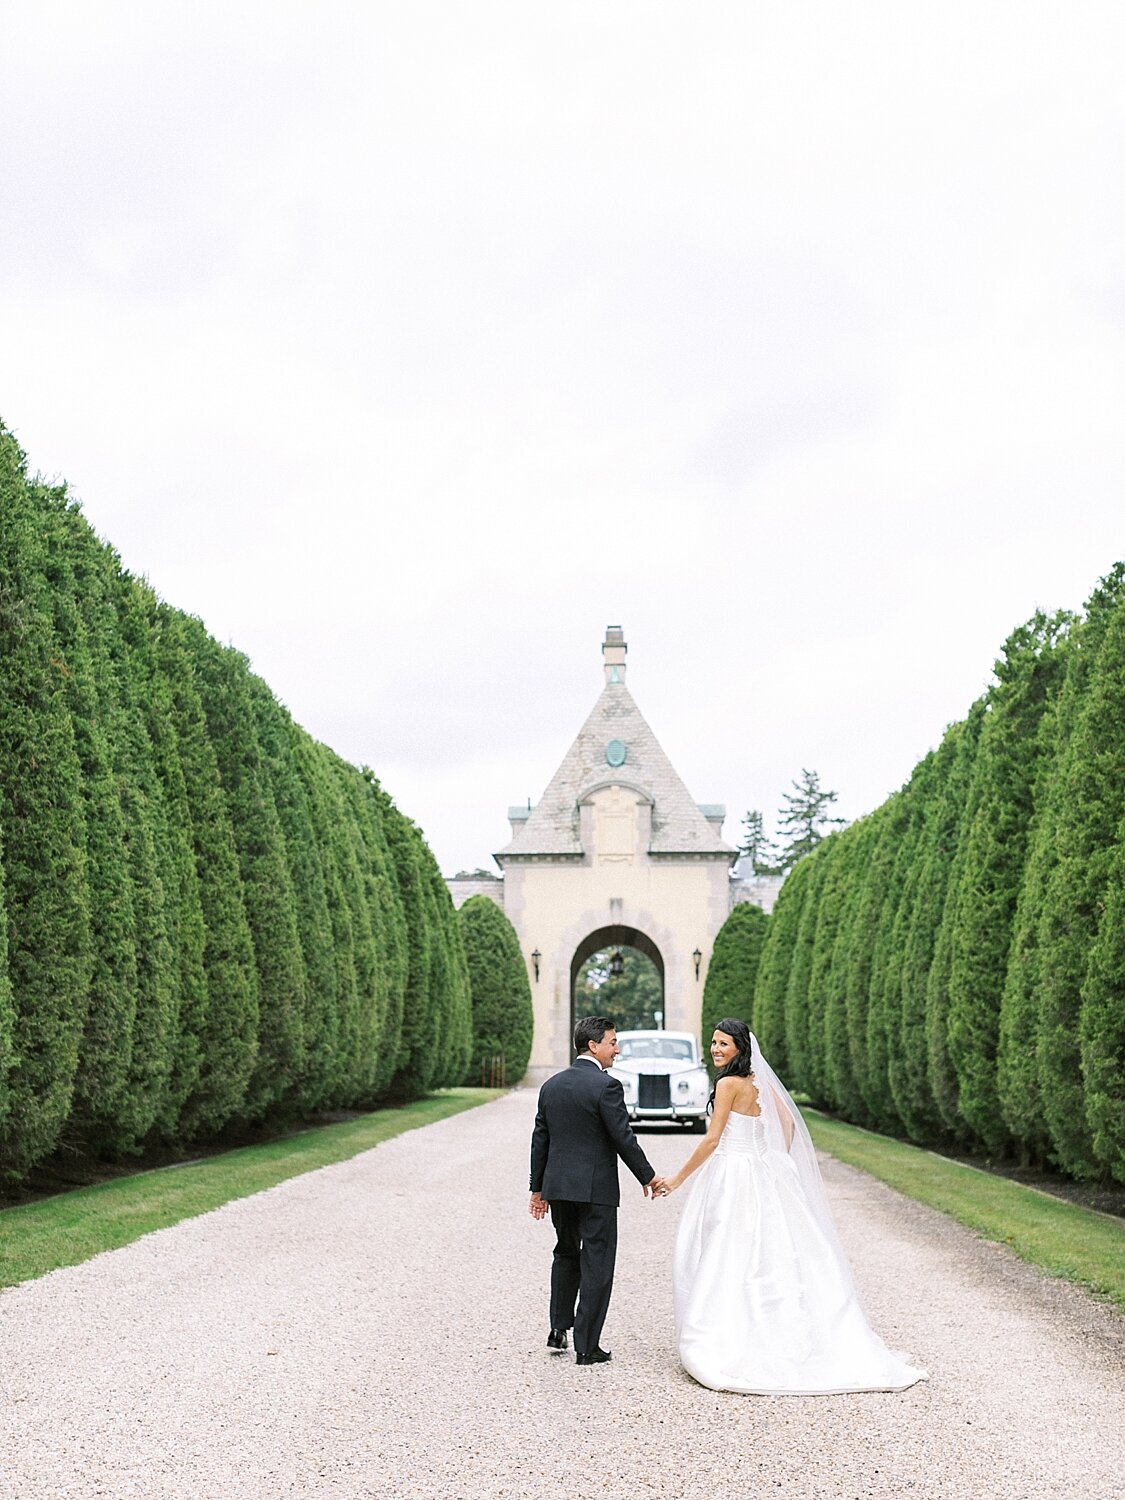 Romantic New York wedding day photographed by Asher Gardner Photography